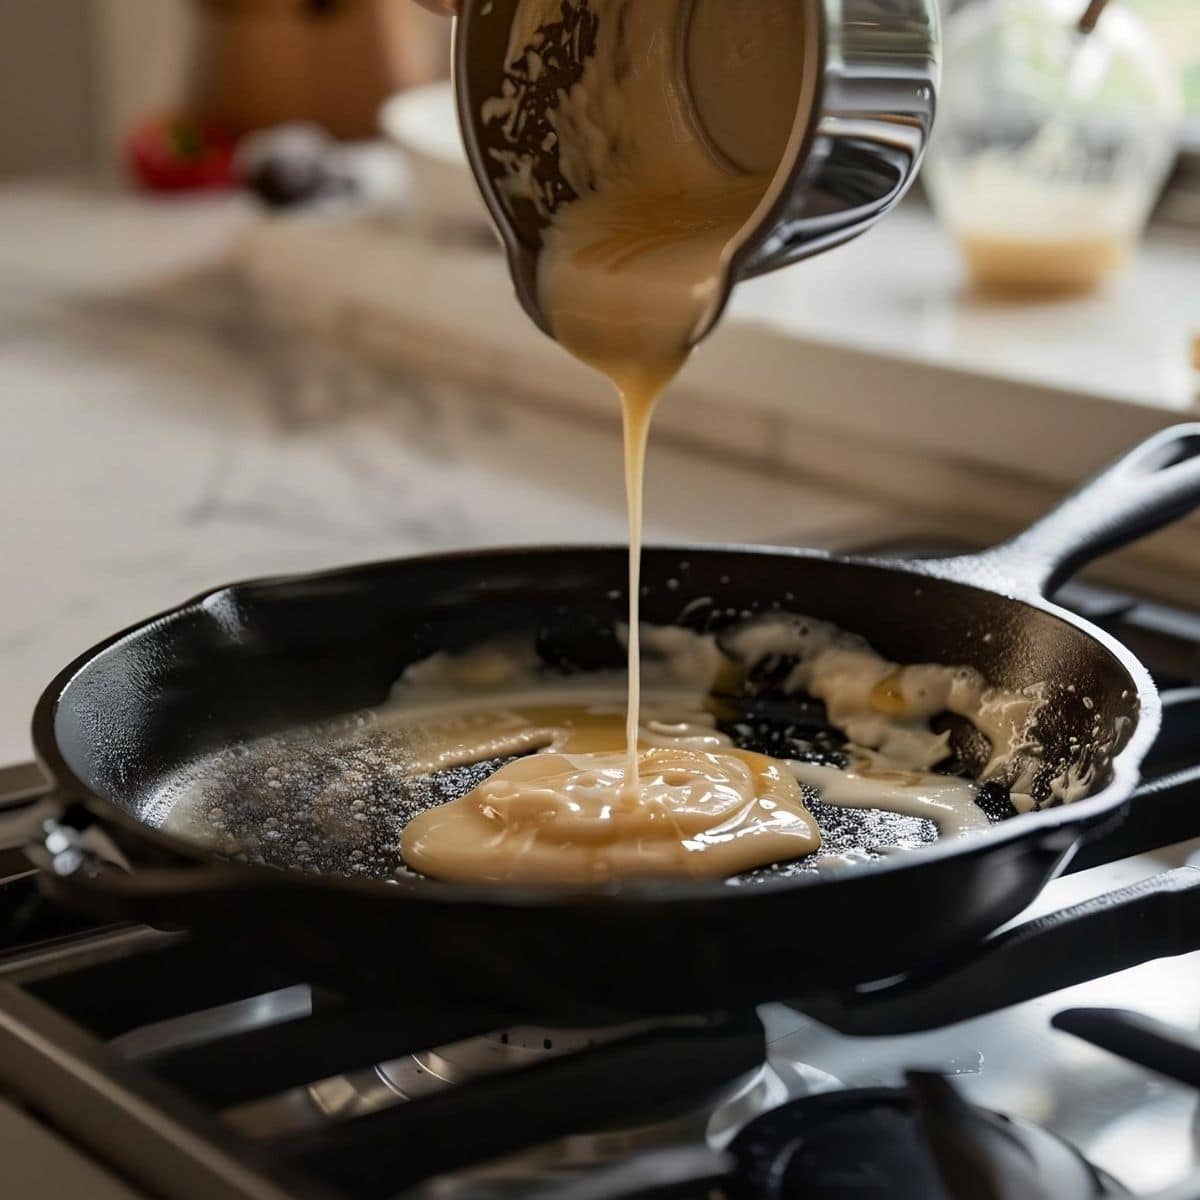 Pouring IHOP Pancake Recipe Batter into a Cast Iron Skillet On a Stove Top